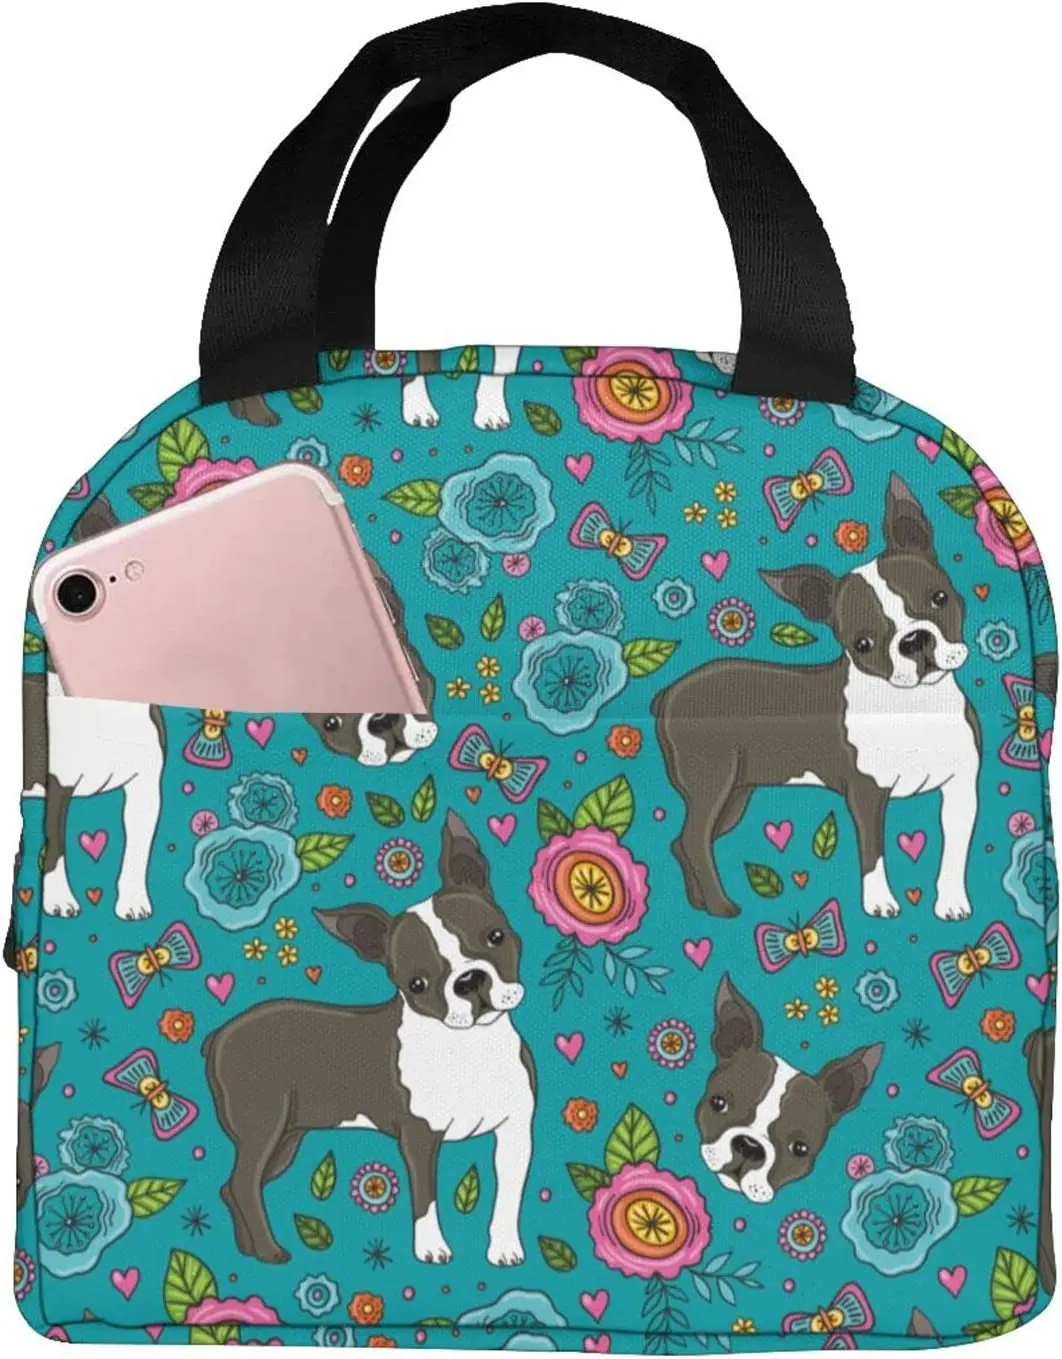 

Boston Terrier And Flowers Lunch Bag Portable Insulated Thermal Lunch Tote Box Reusable Cooler Tote Bag For Men Women Camping